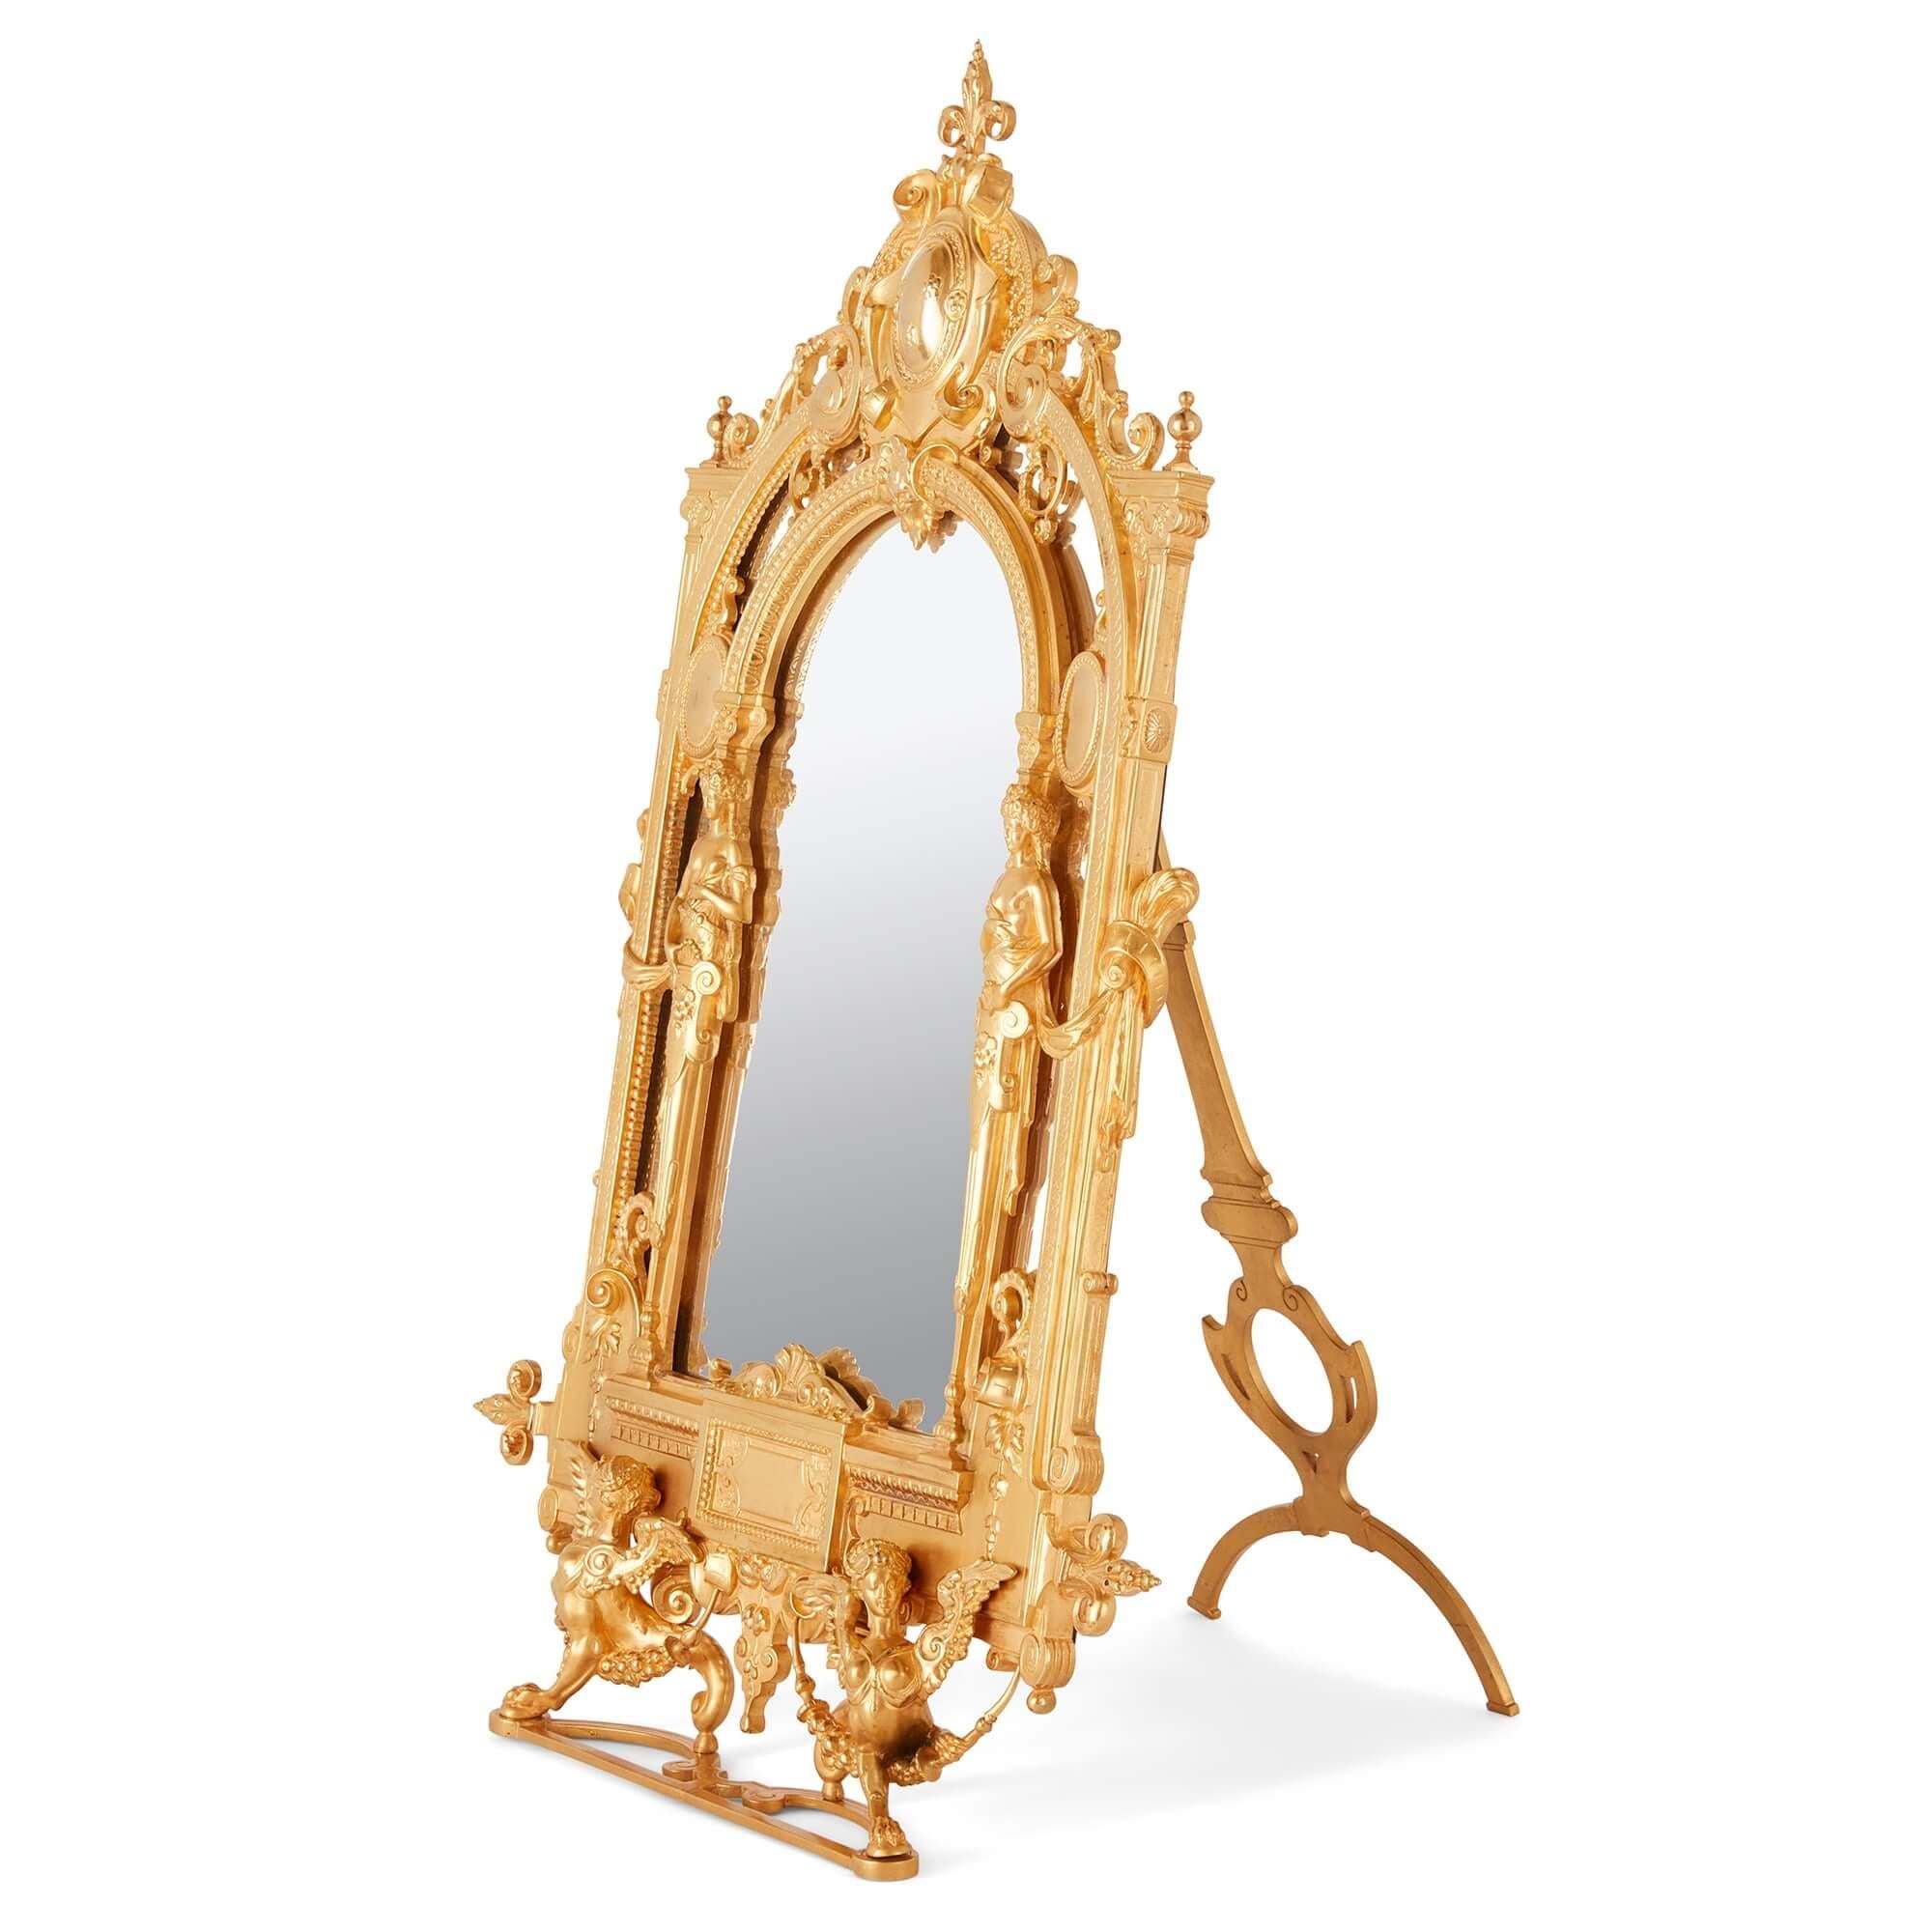 19th century Empire style ormolu table mirror
French, 19th Century
Height 56cm, width 37cm, depth 4cm, depth when open 46cm

This fine table mirror is cast entirely in ormolu in the Empire style, which became popular in the early 19th century. 

The